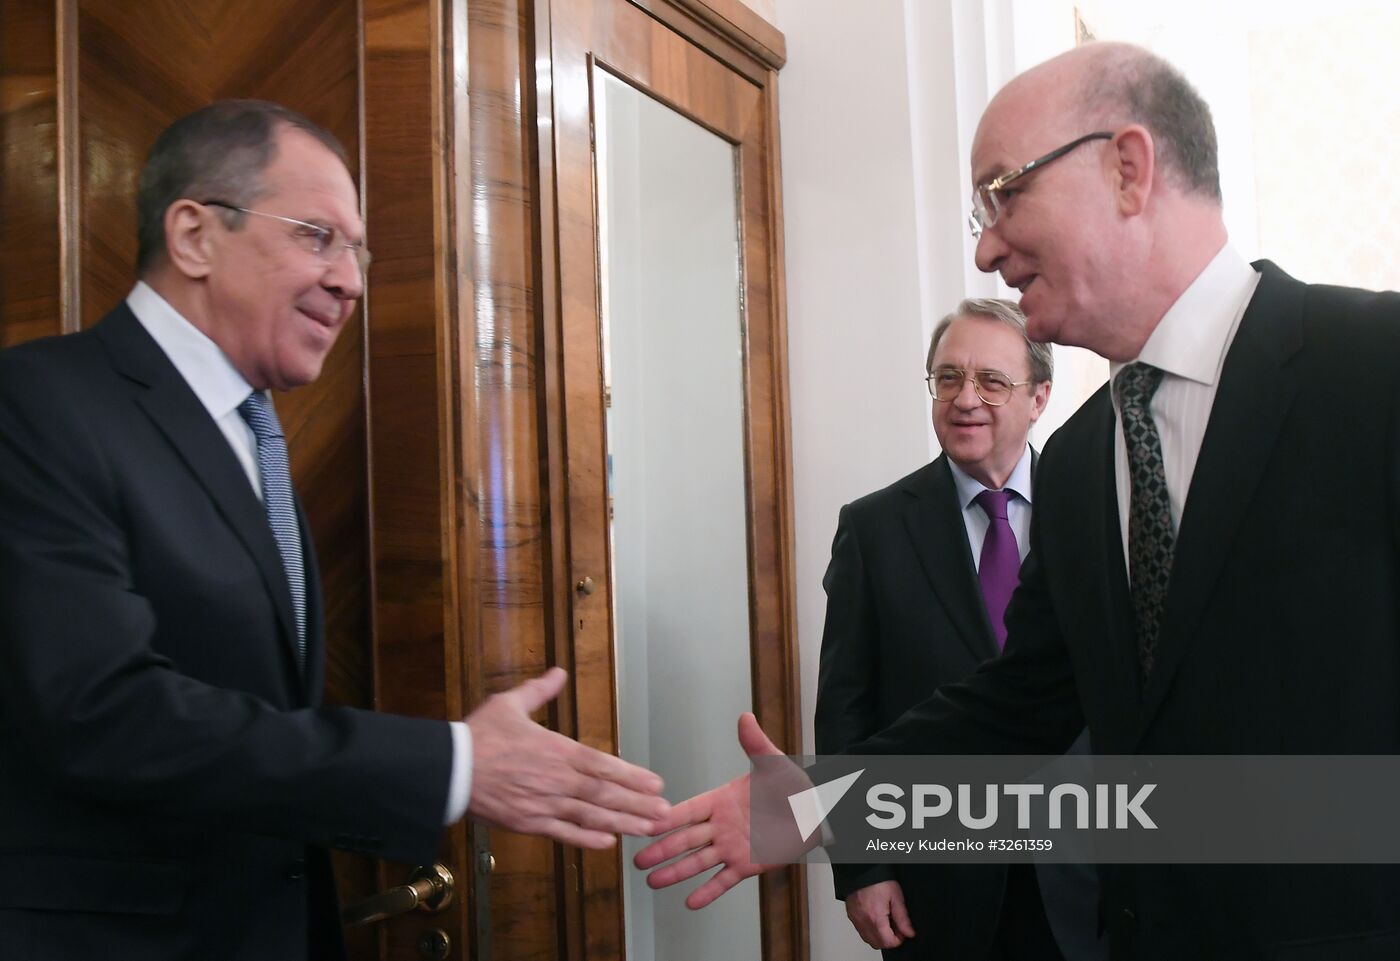 Russian FM Sergey Lavrov meets with African Union Commissioner for Peace and Security Smail Chergui